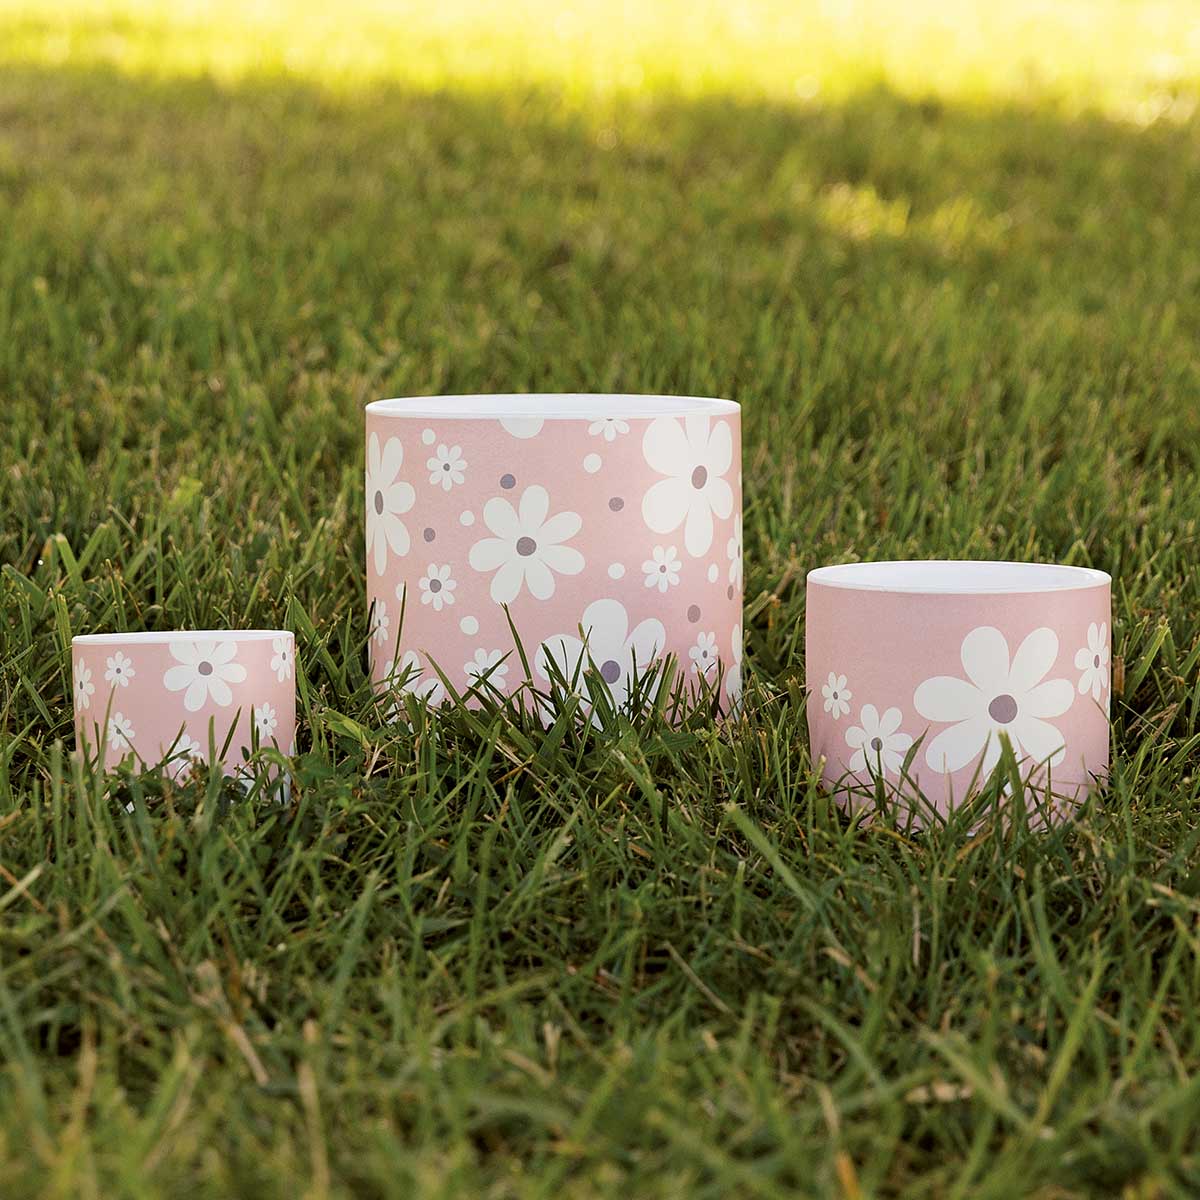 b50 POT WHOOPSIE DAISY SMALL 3IN X 2.5IN PINK/WHITE CERAMIC